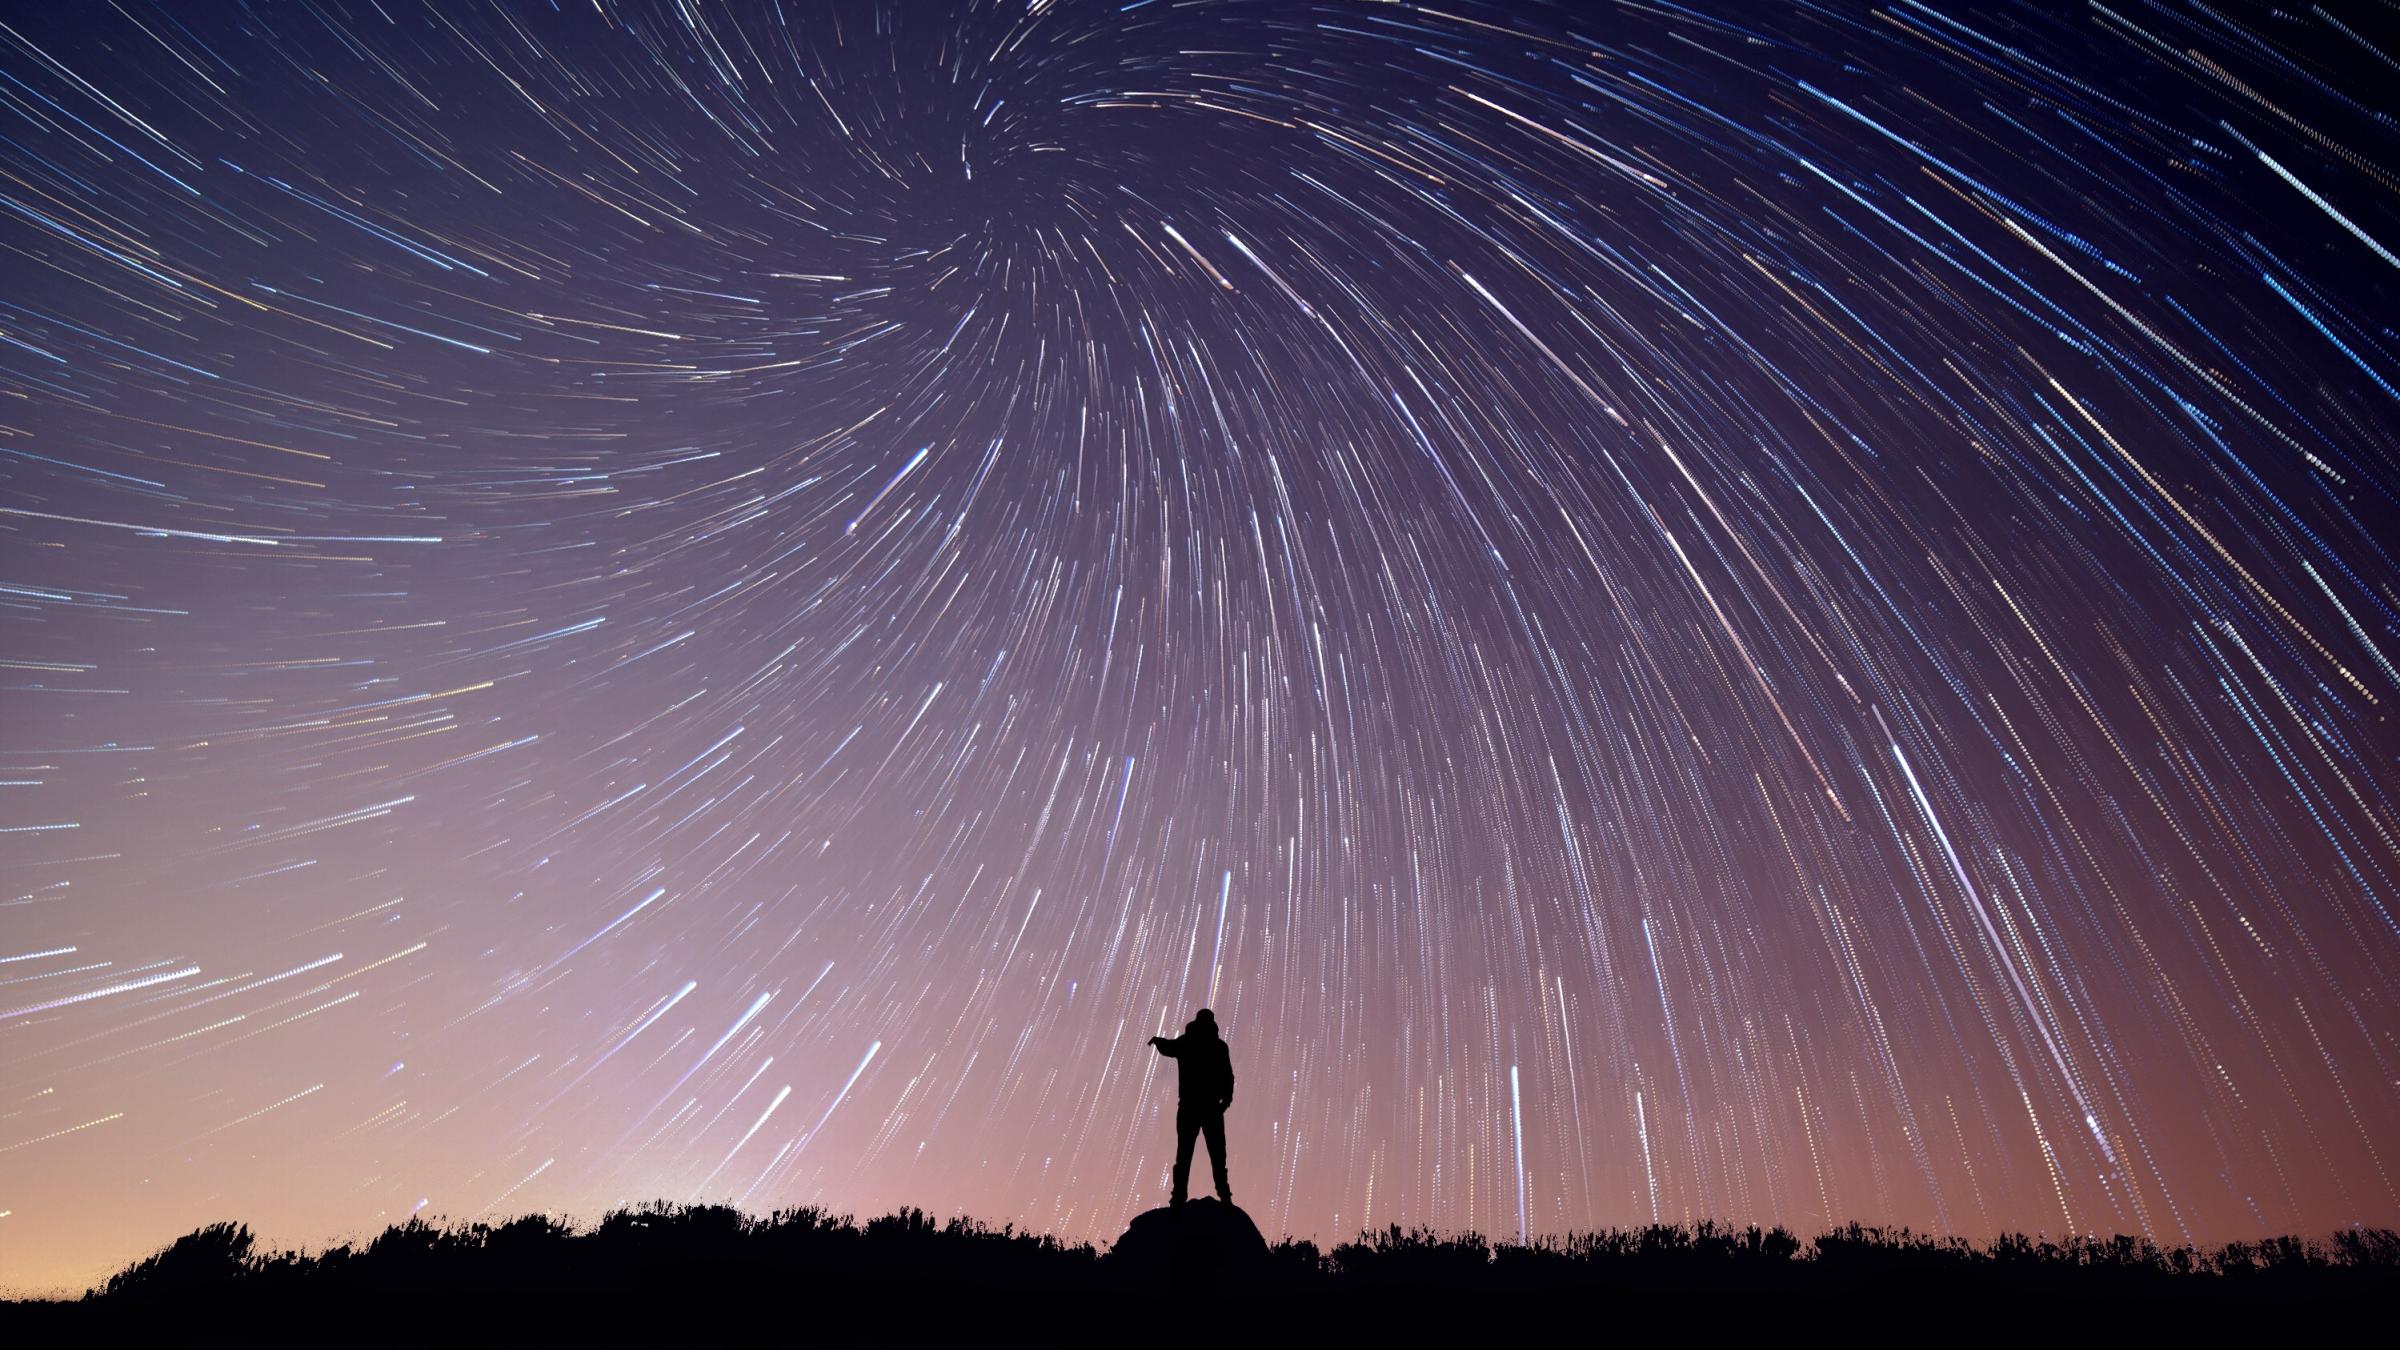 Brisbane To Be Treated To Meteor Shower This Weekend, Here's Where To Look!